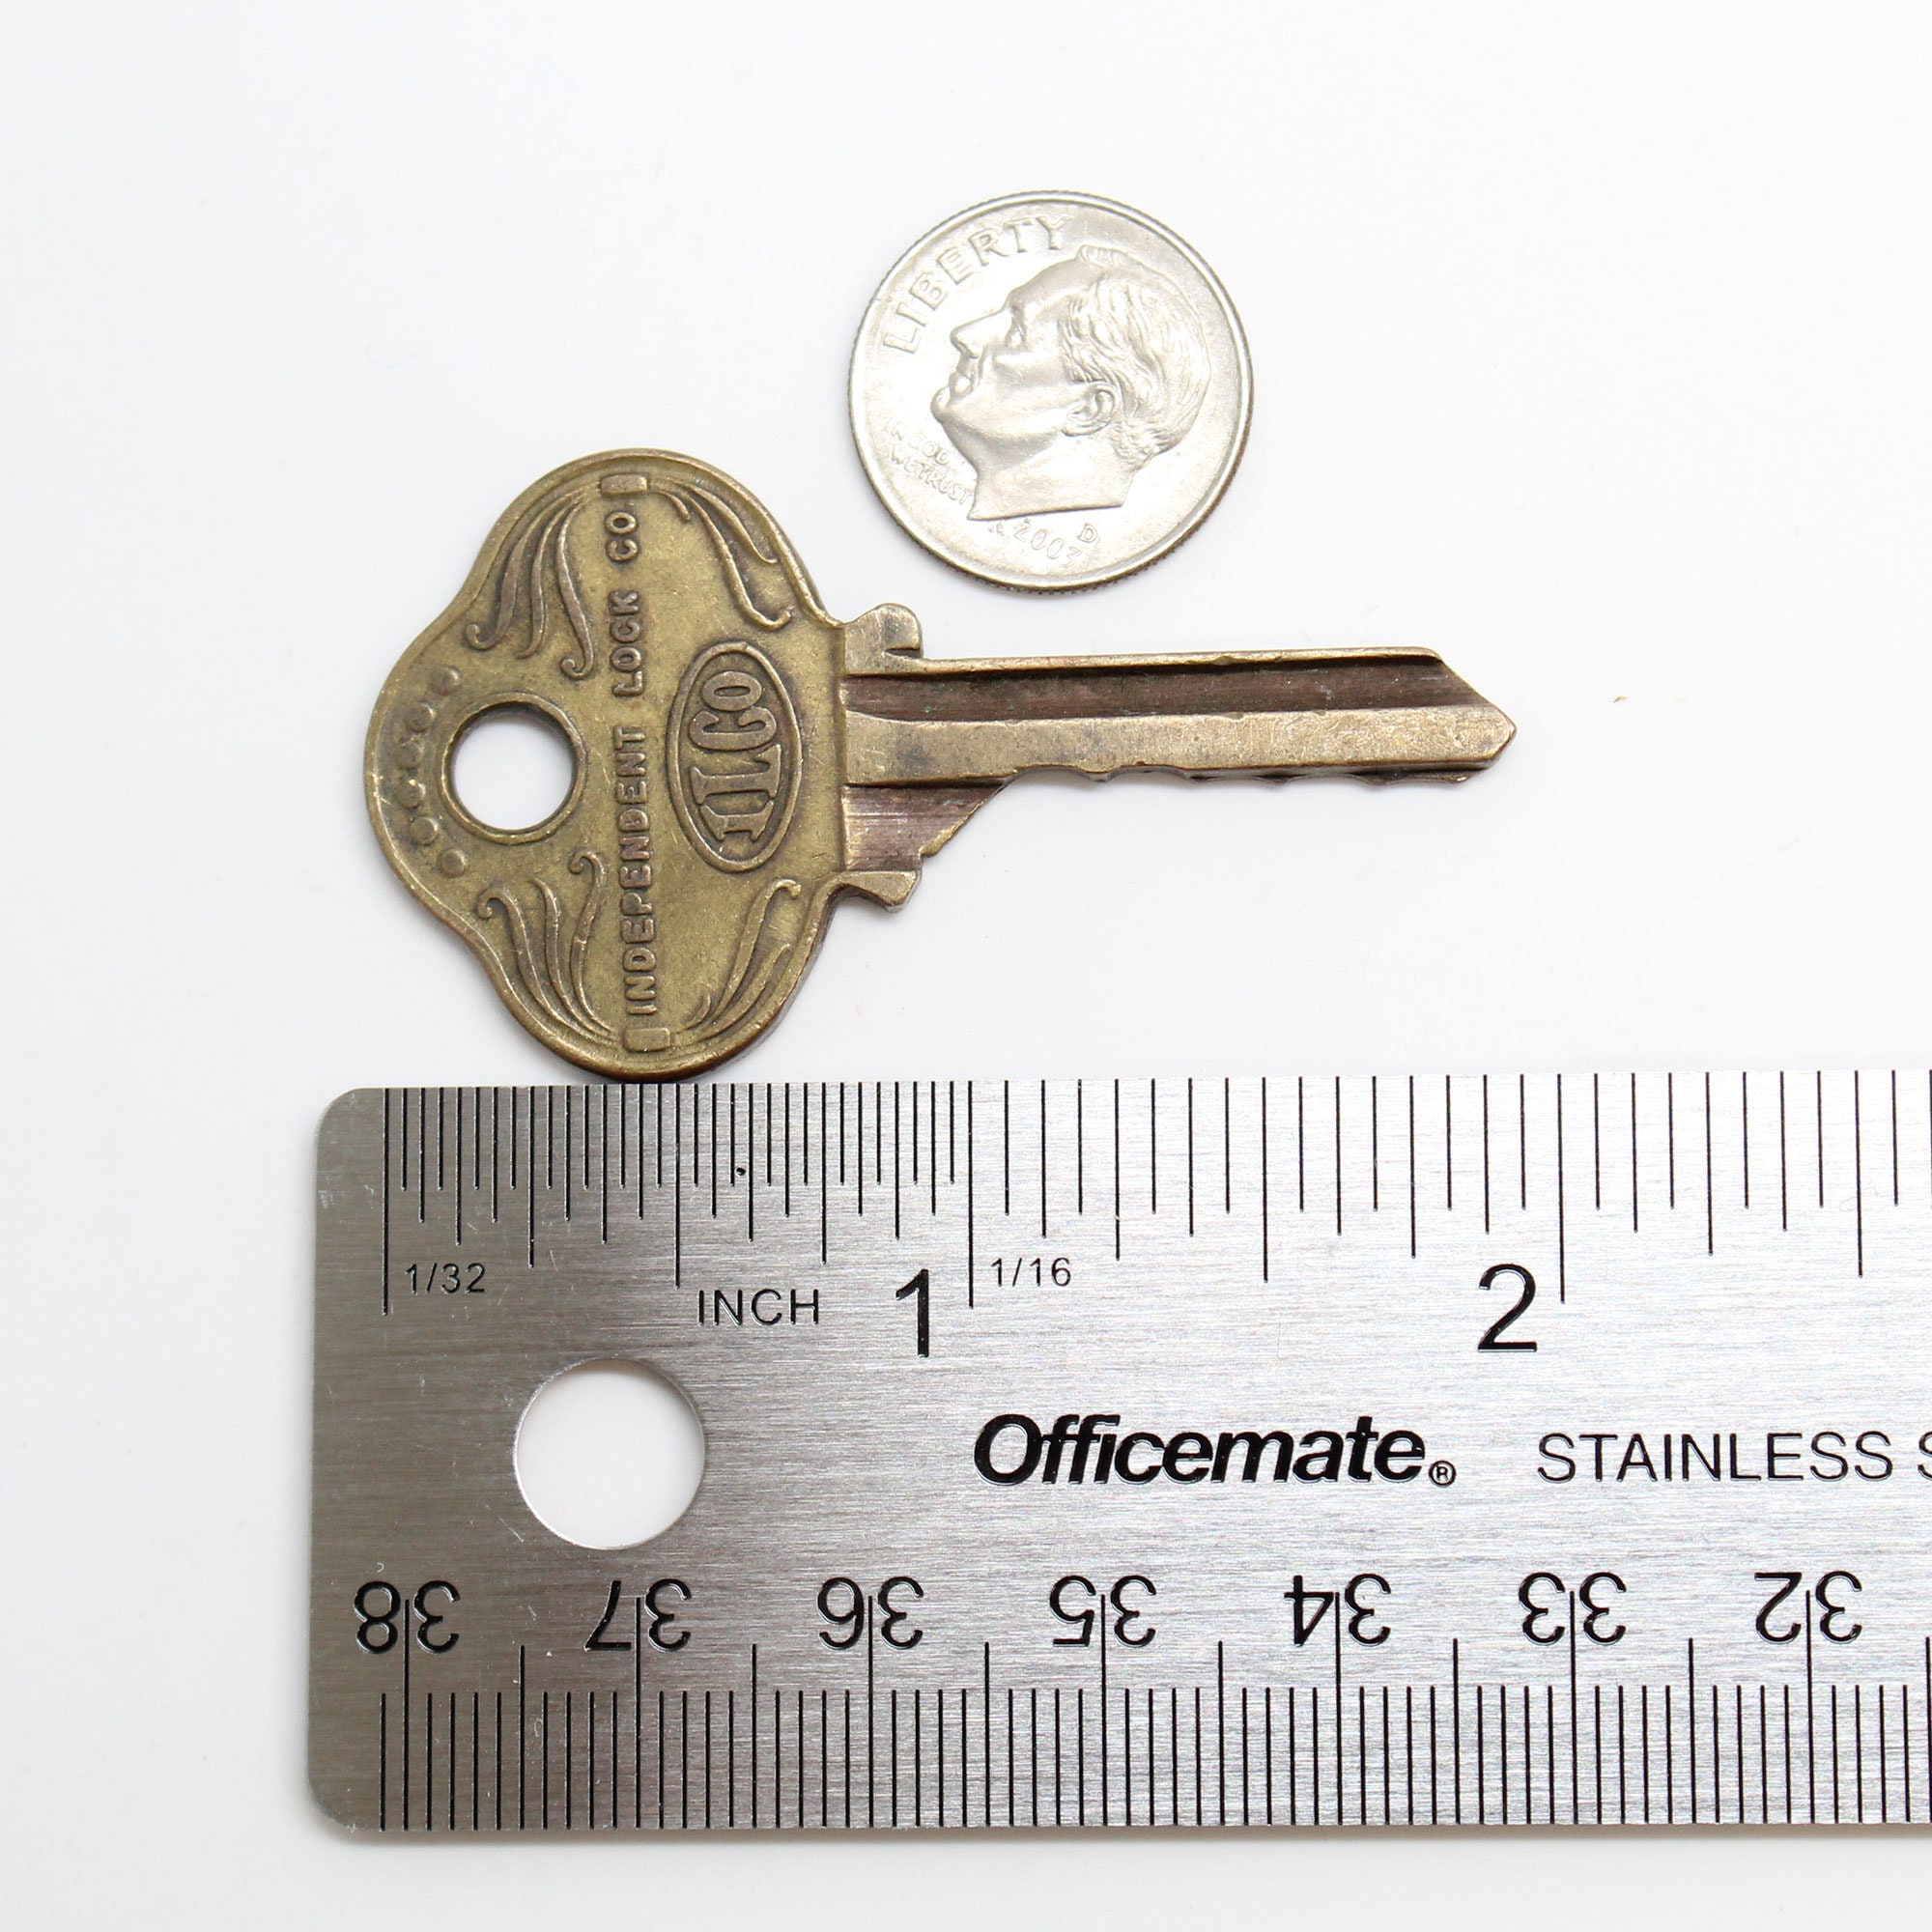 Independent Lock Key, ILCO, Old Made in the USA Key, Charm Key - Etsy